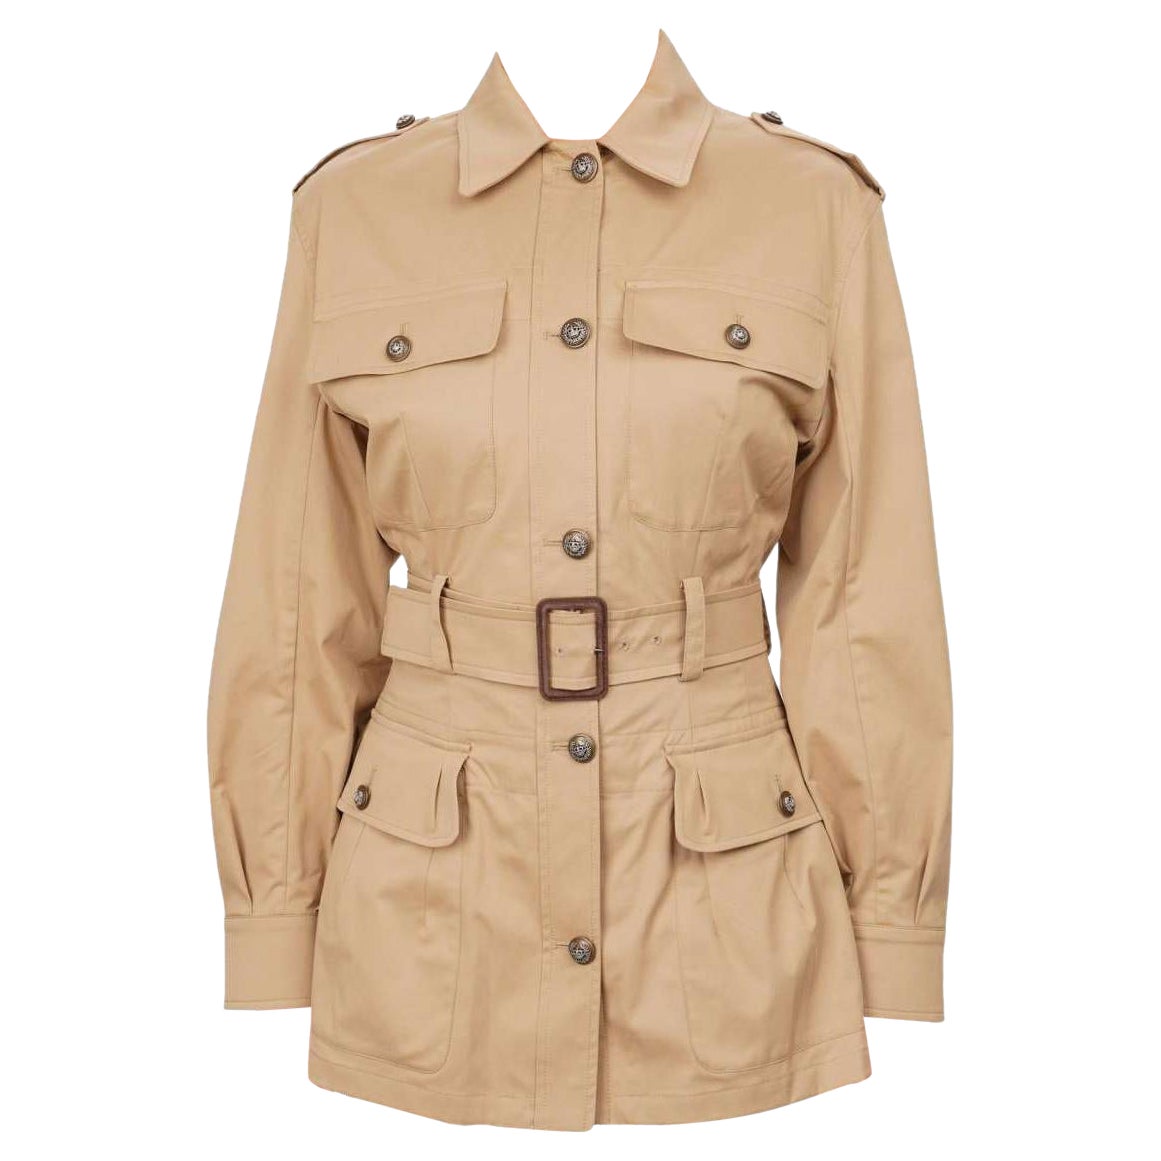 Dolce & Gabbana Metal Crown Buttons Trench Coat Safari Jacket Beige IT 40 For Sale